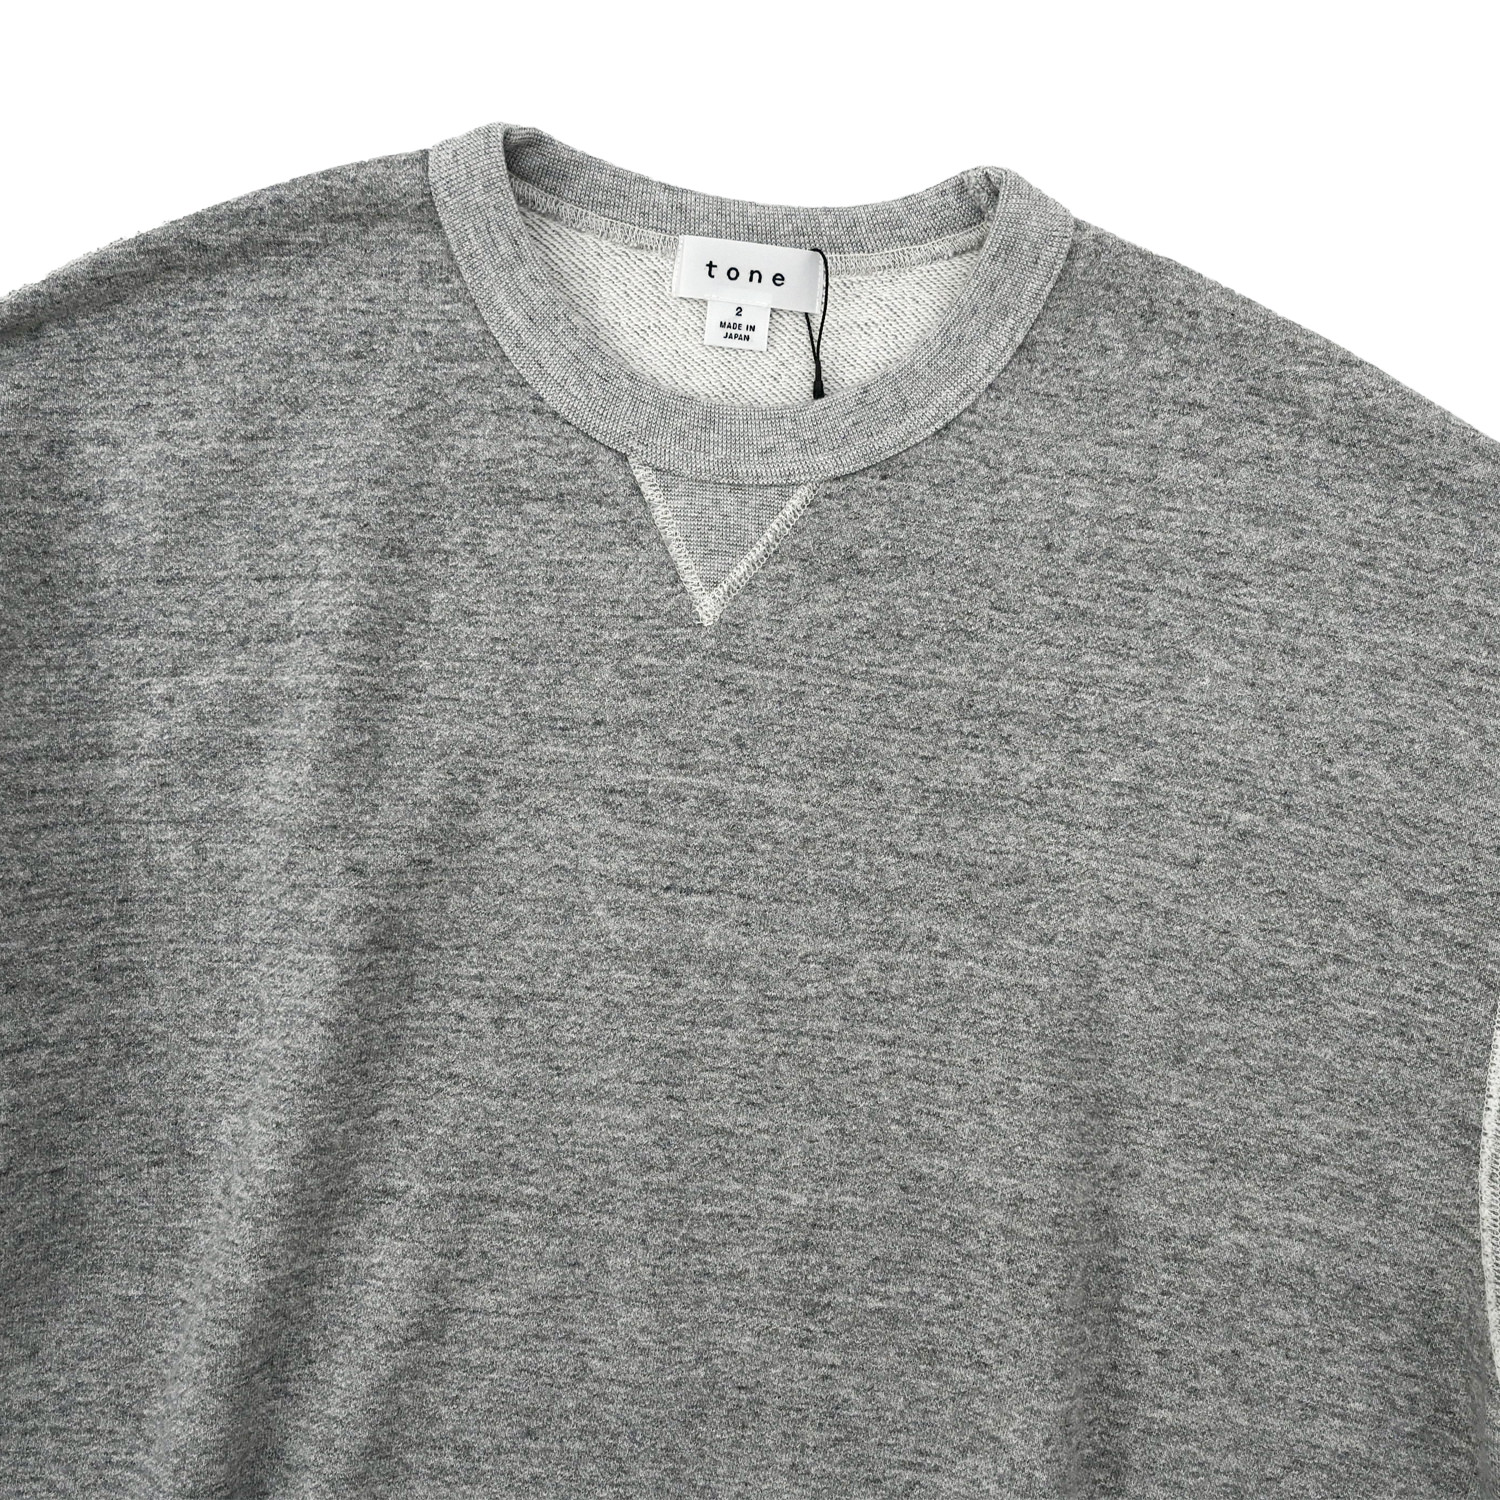 tone (BASIC SWEAT PULLOVER Ash Gray) 通販 ｜ SUPPLY TOKYO online store